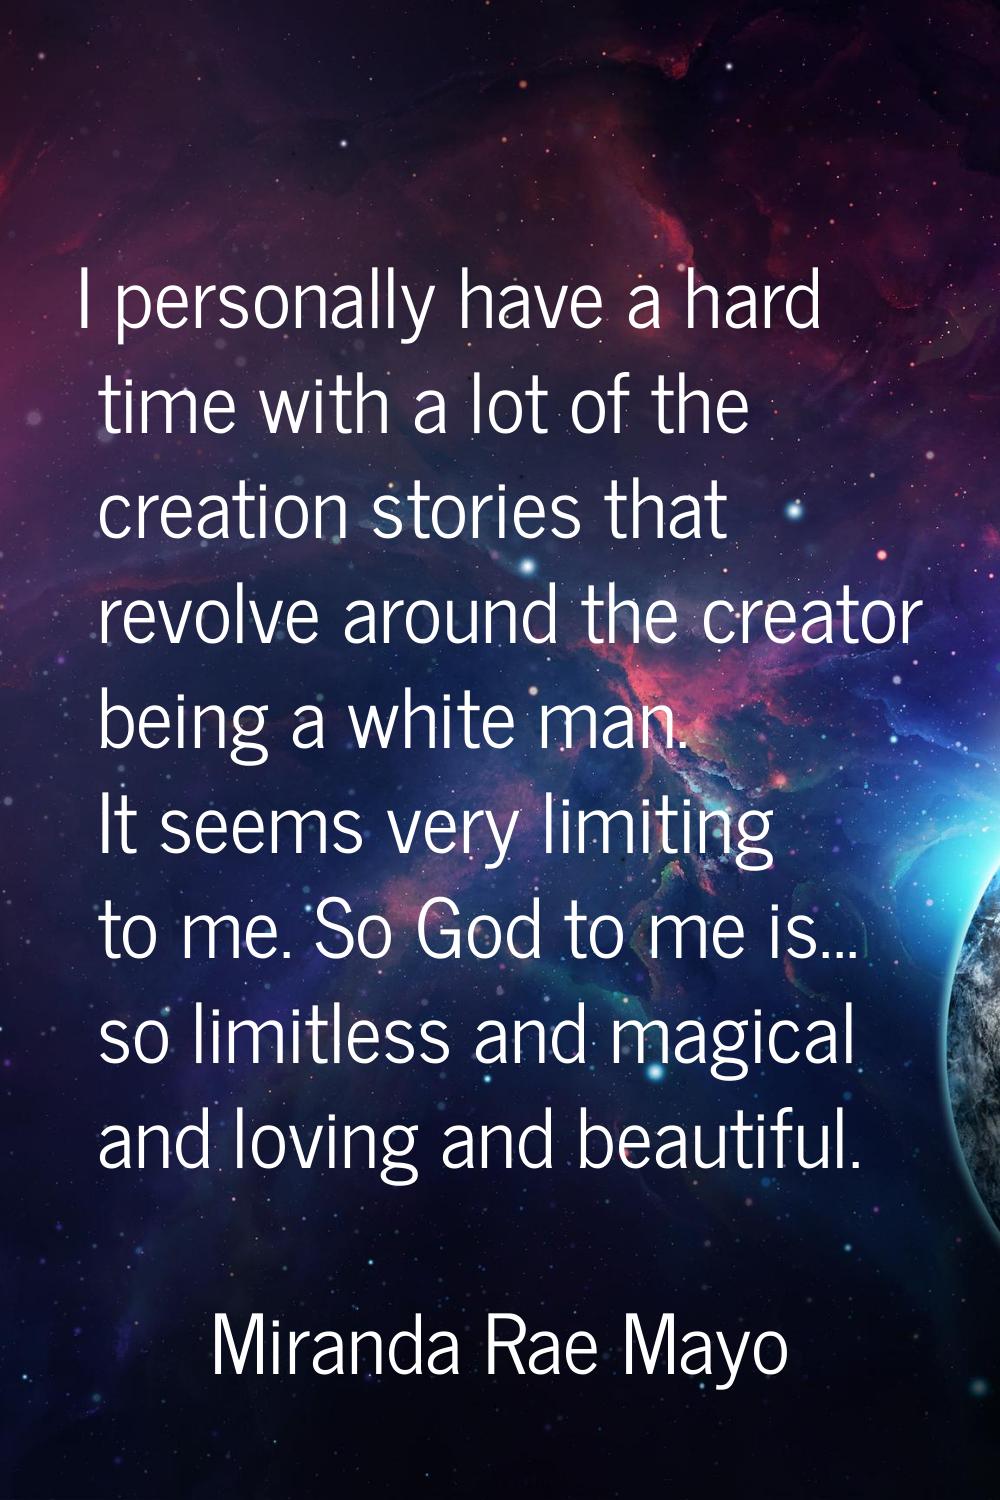 I personally have a hard time with a lot of the creation stories that revolve around the creator be